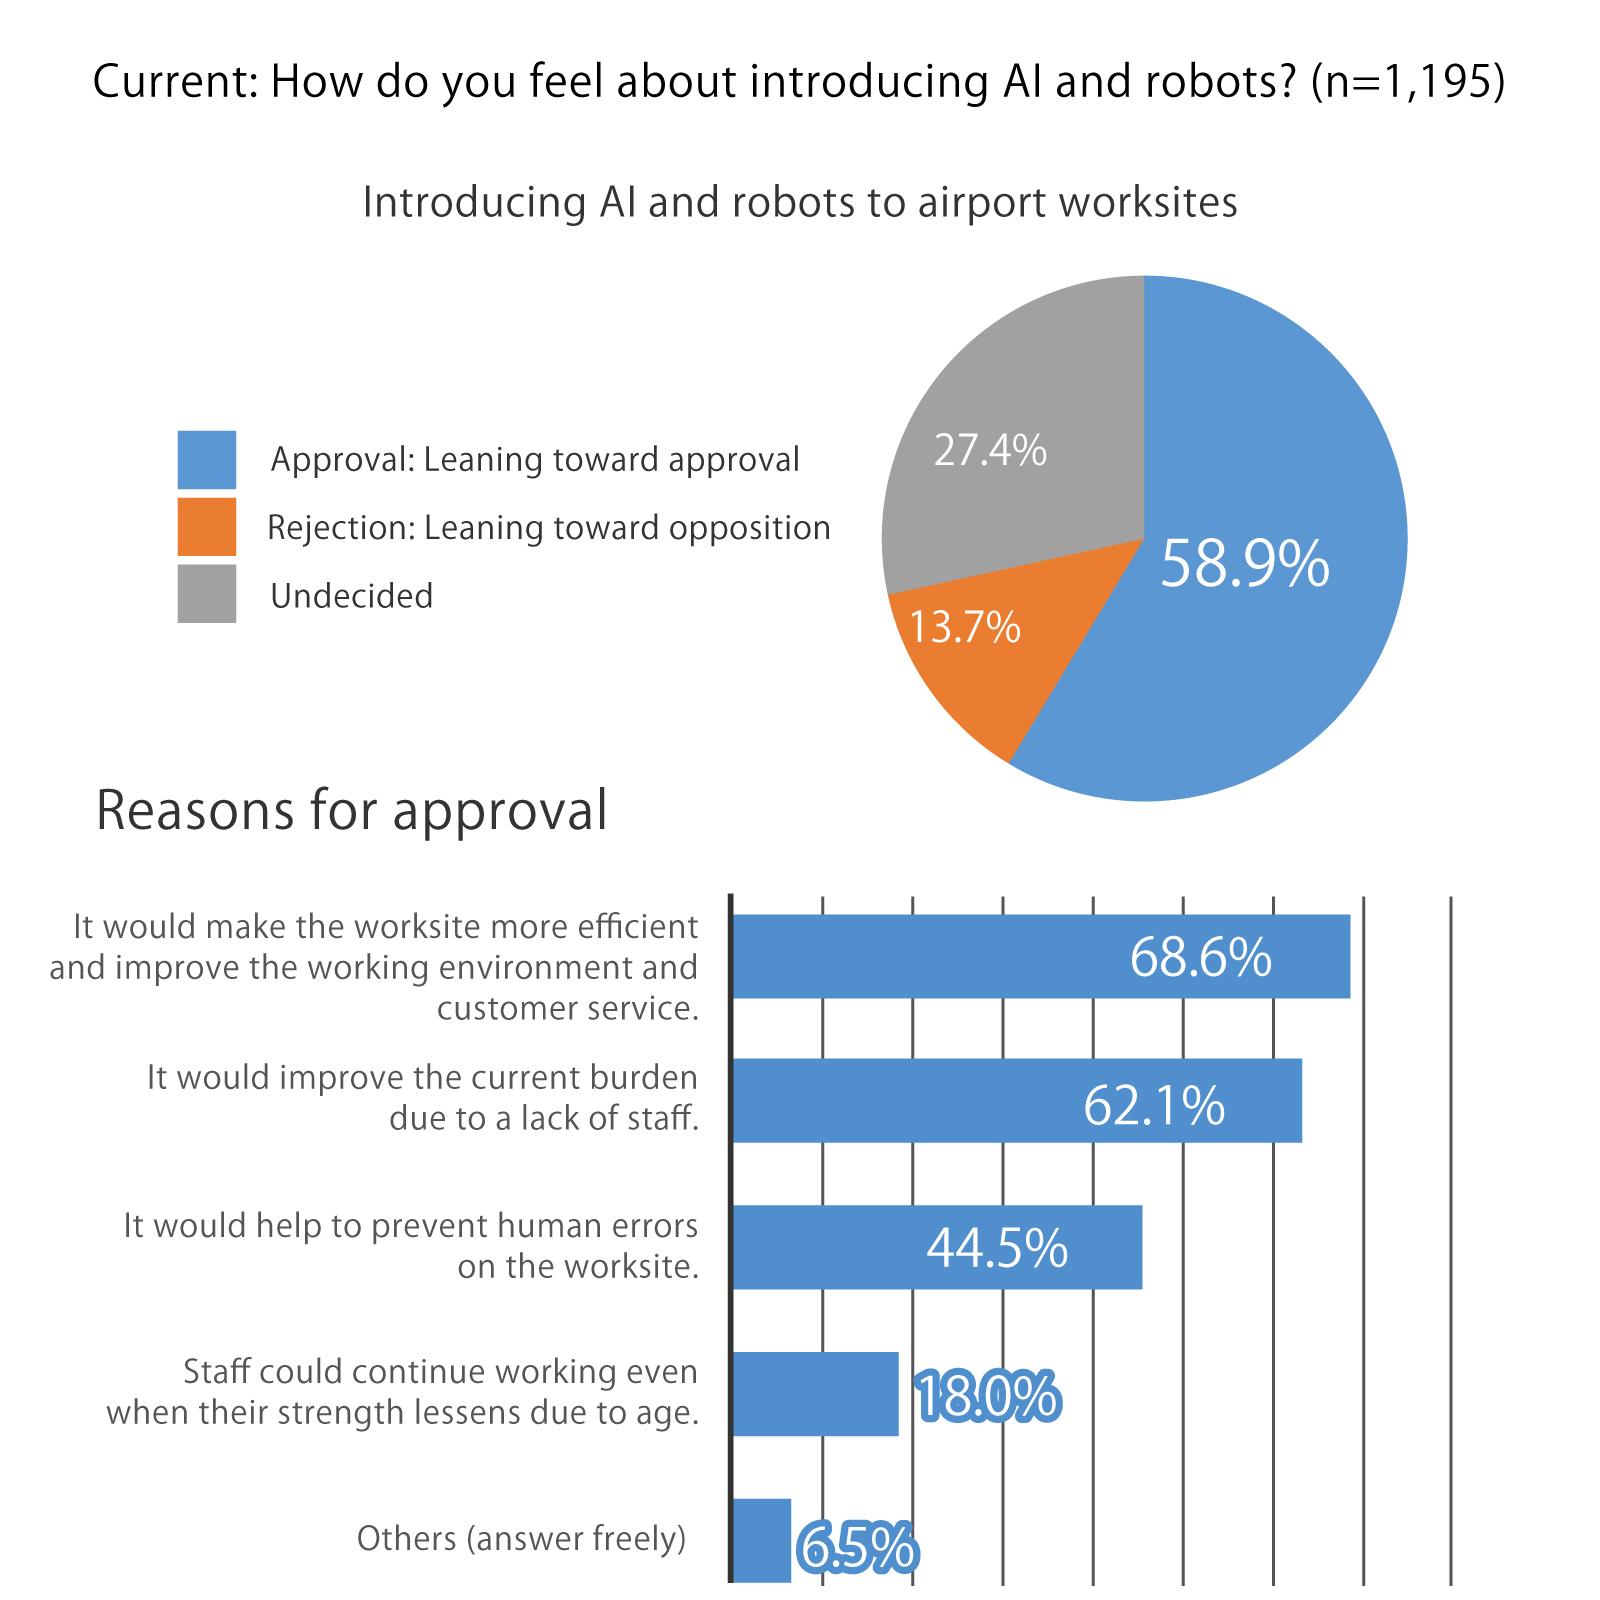 figure: Current: How do you feel about introducing AI and robots?